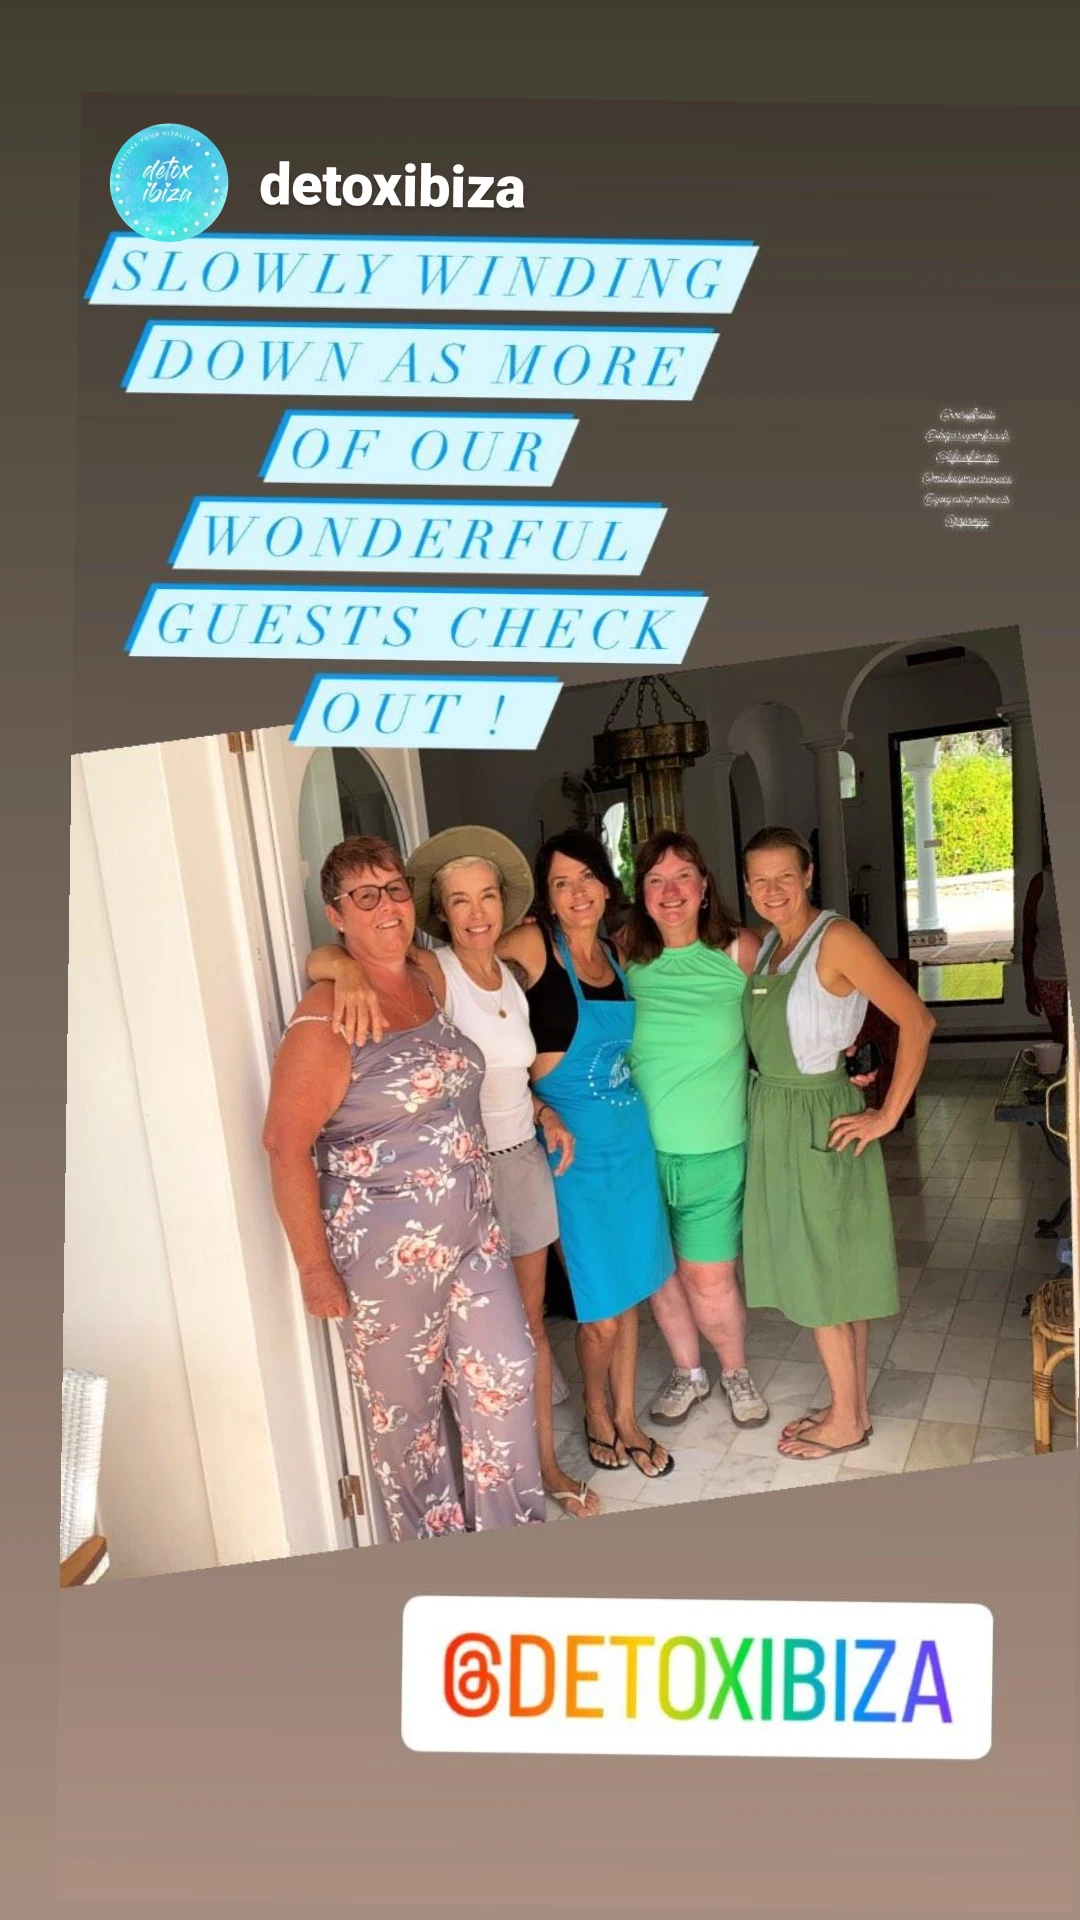 Our Clients on the last day of their oncredible transformational journey. Weight loss, reset diet, recovering from illness, menopause all res=asons these clients came on this detox retreat.